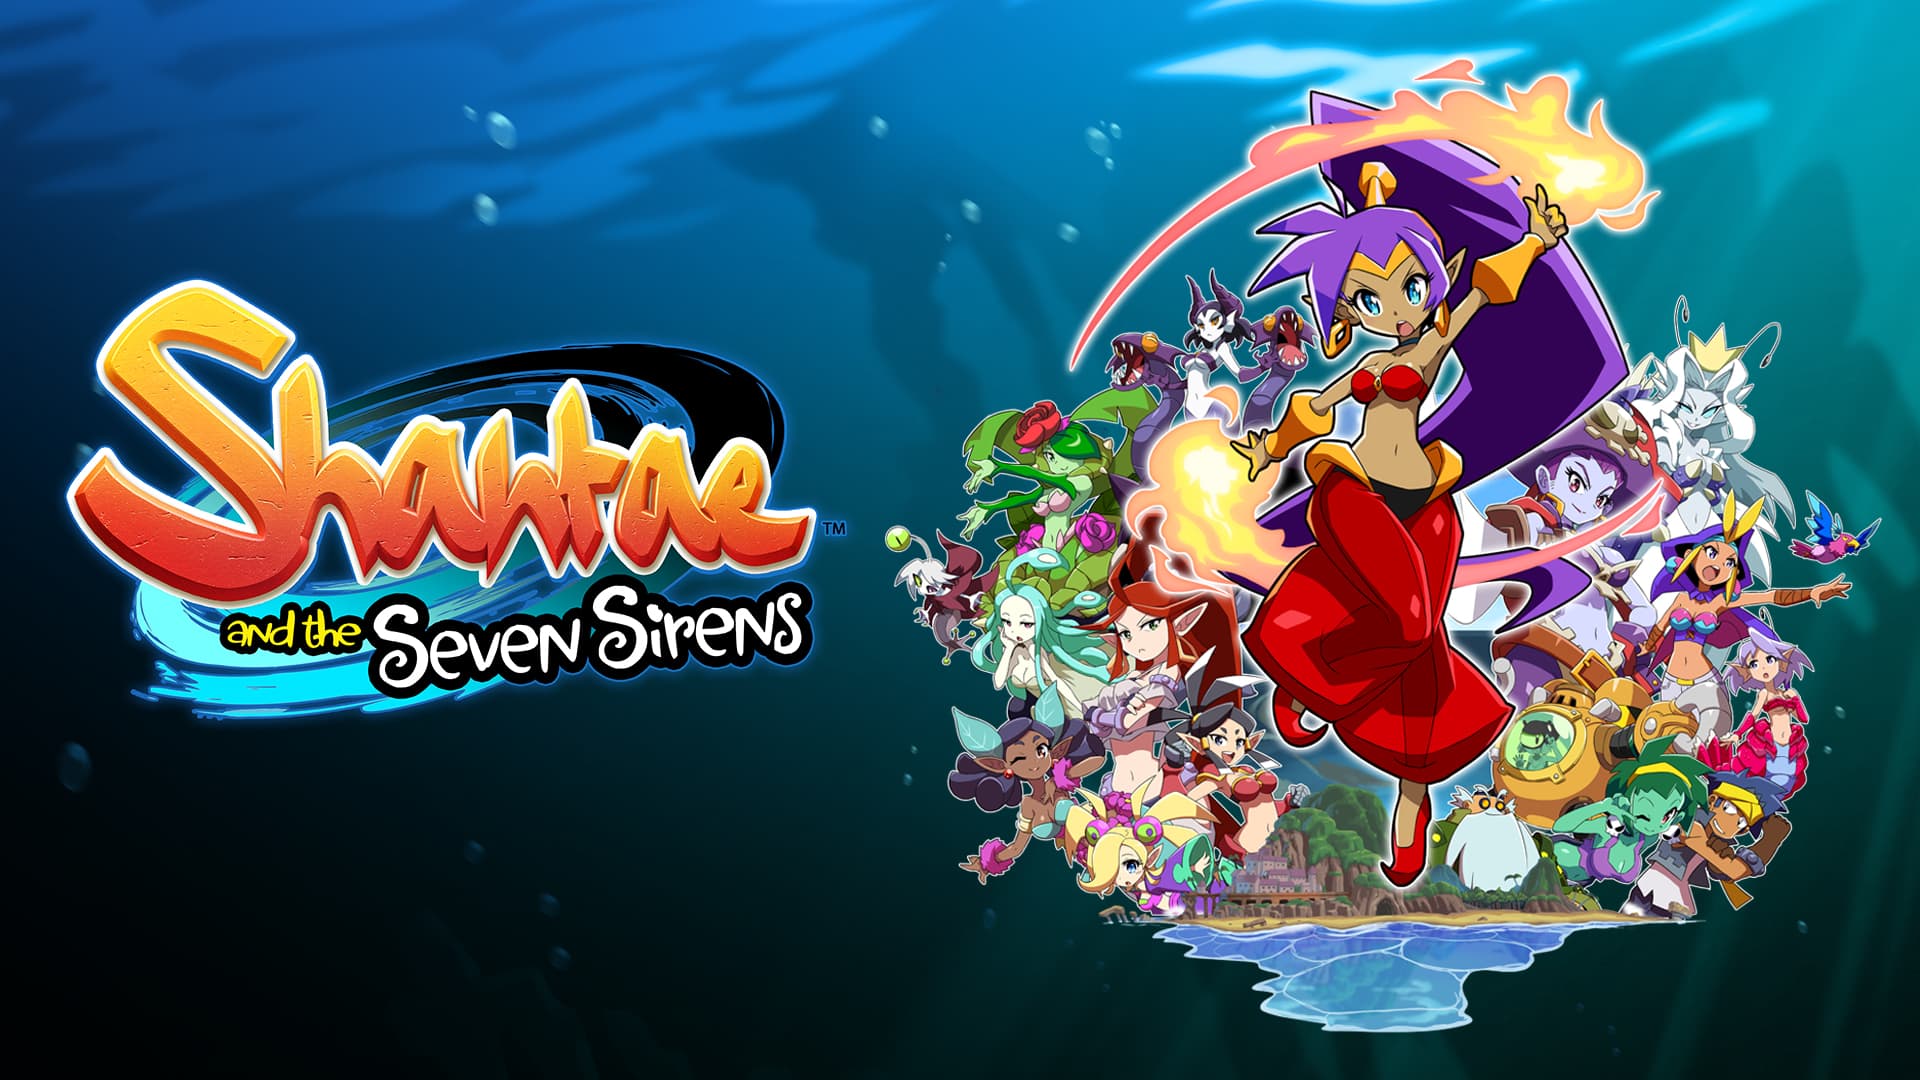 shantae-and-the-seven-sirens-launches-on-all-platforms-gayming-magazine